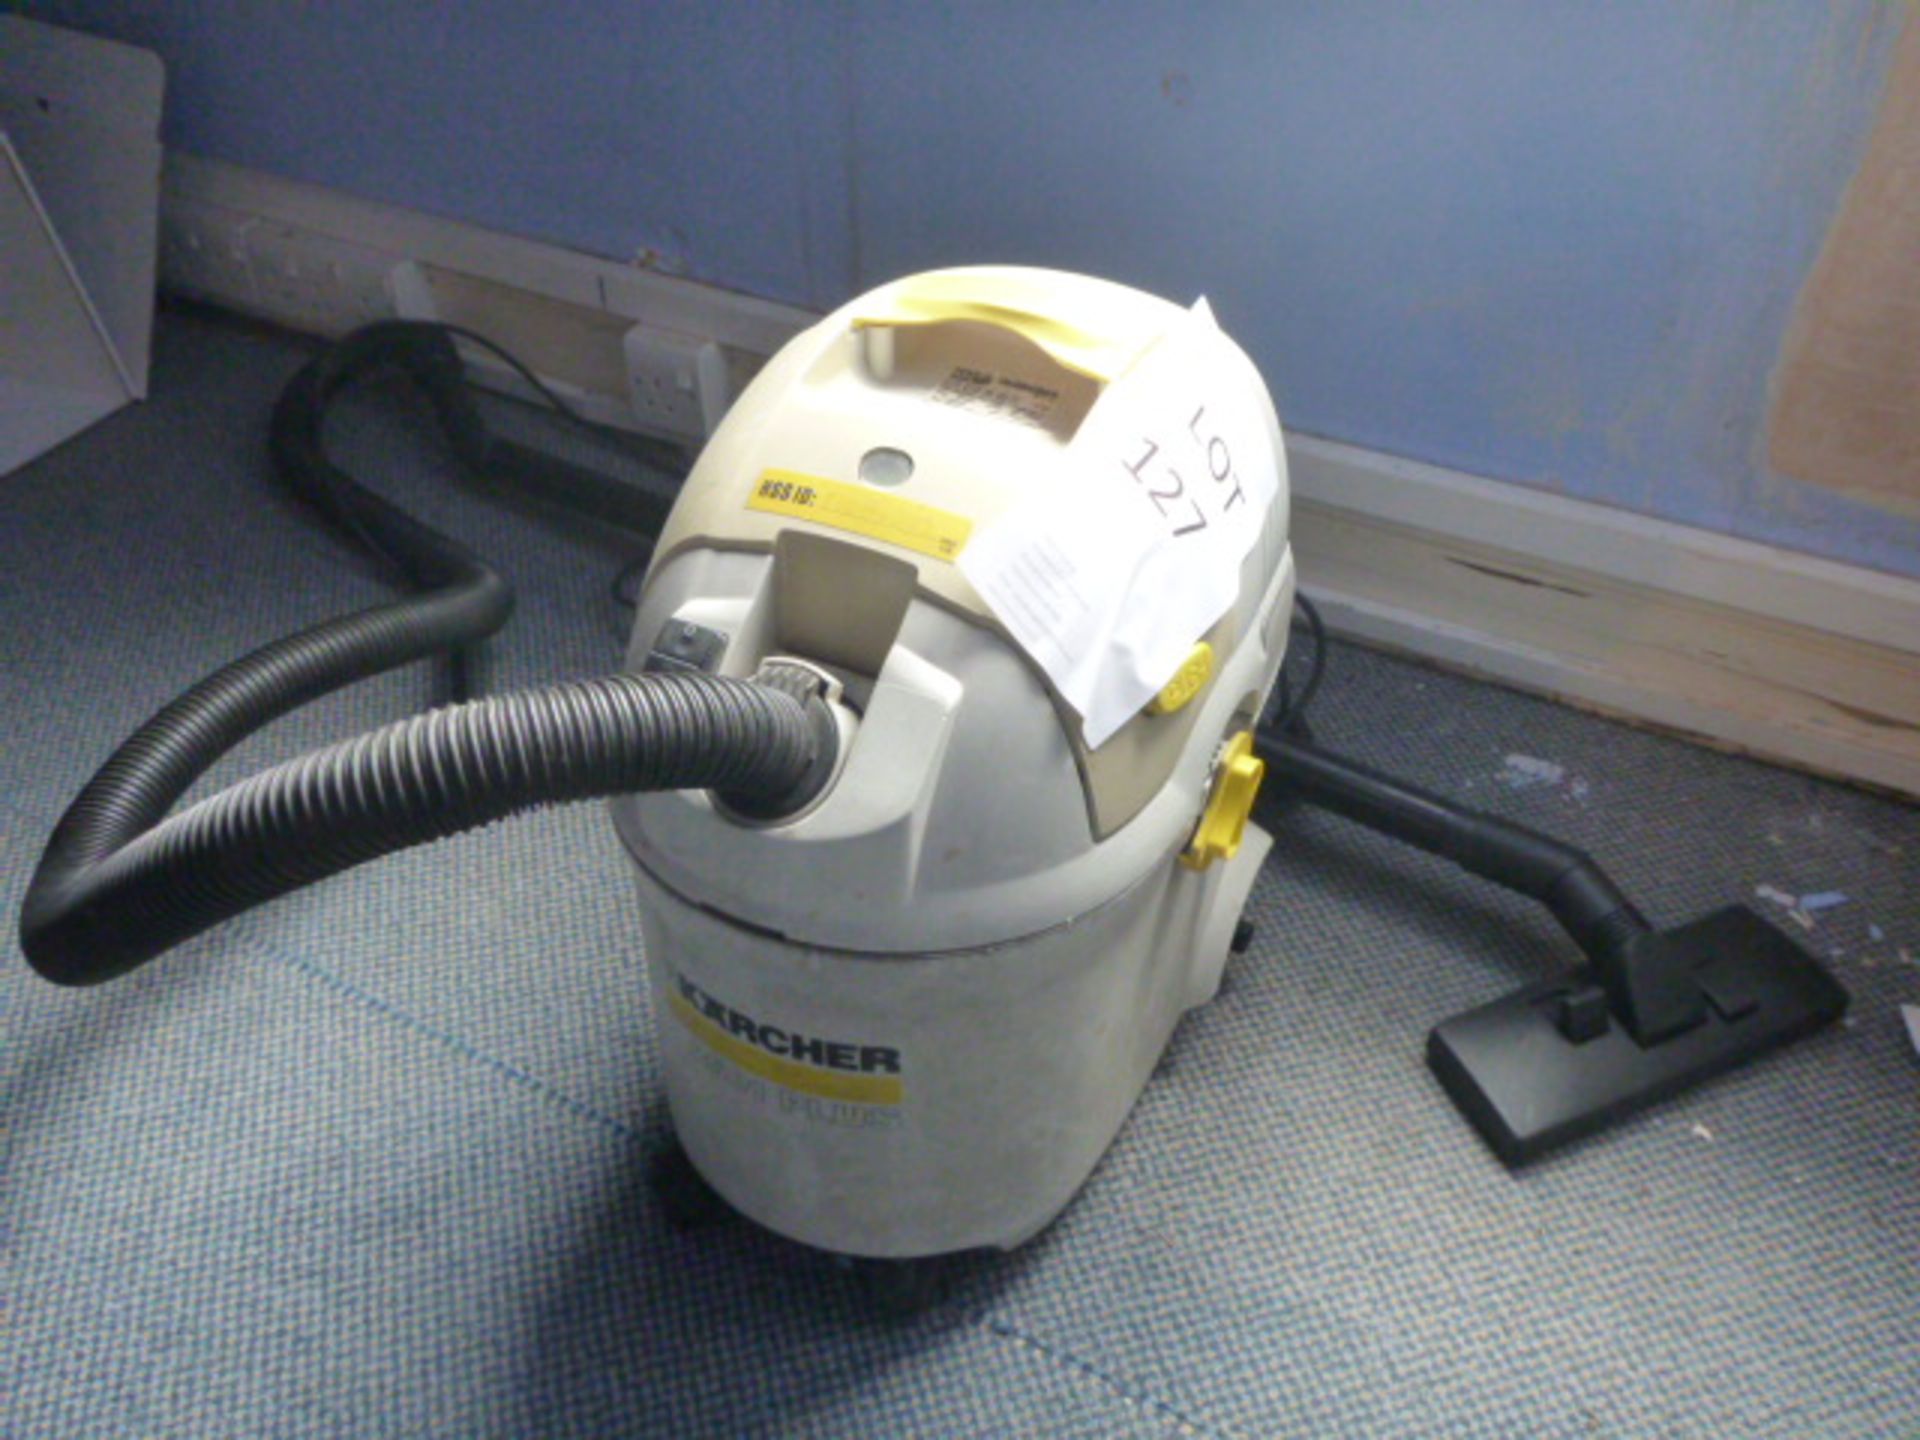 Karcher 2601 Plus Vacuum (Please Note this item is located in Warwick- Collection by Appointment